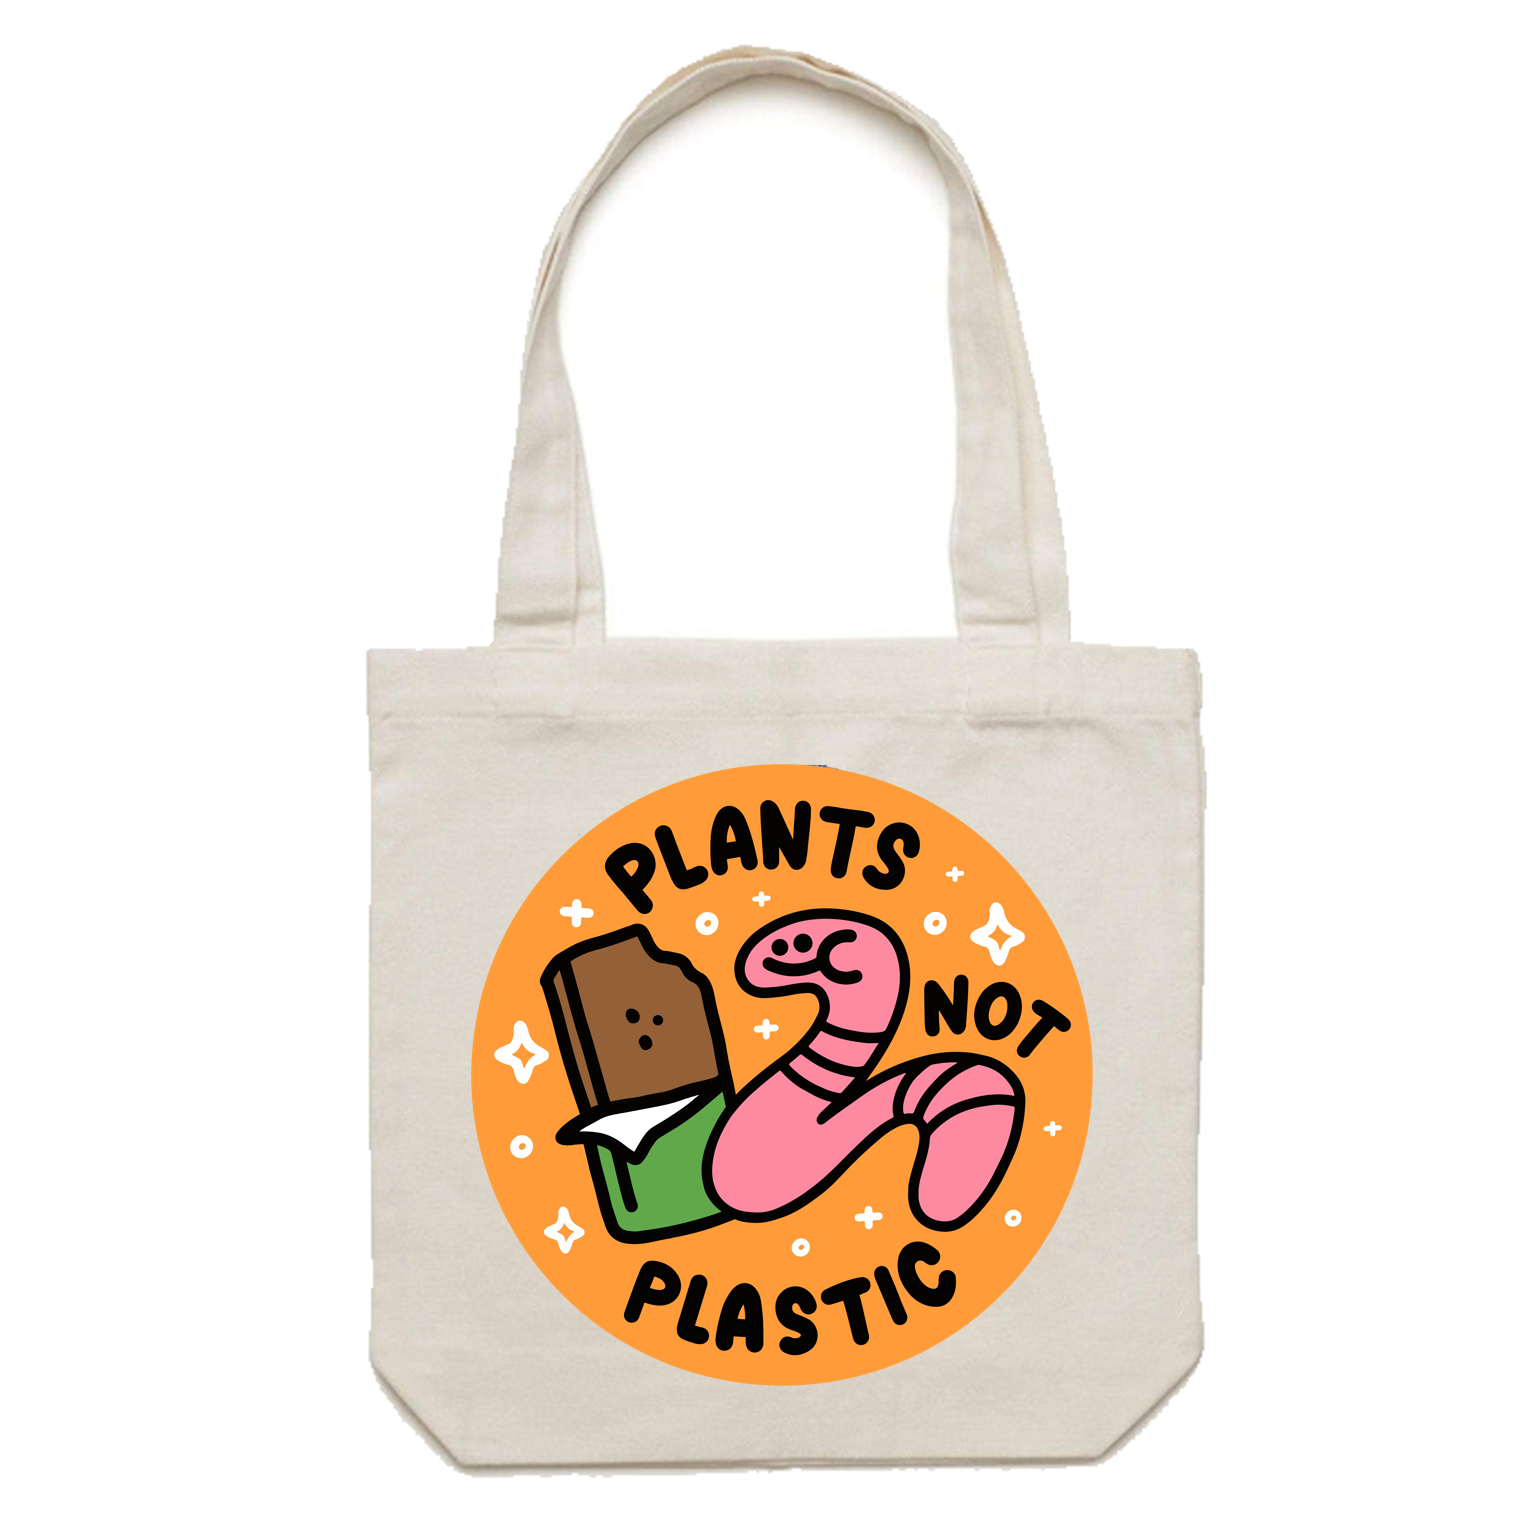 White canvas AS Colour tote bag with a design that says Plants not Plastic and has a smiling worm eating an energy bar